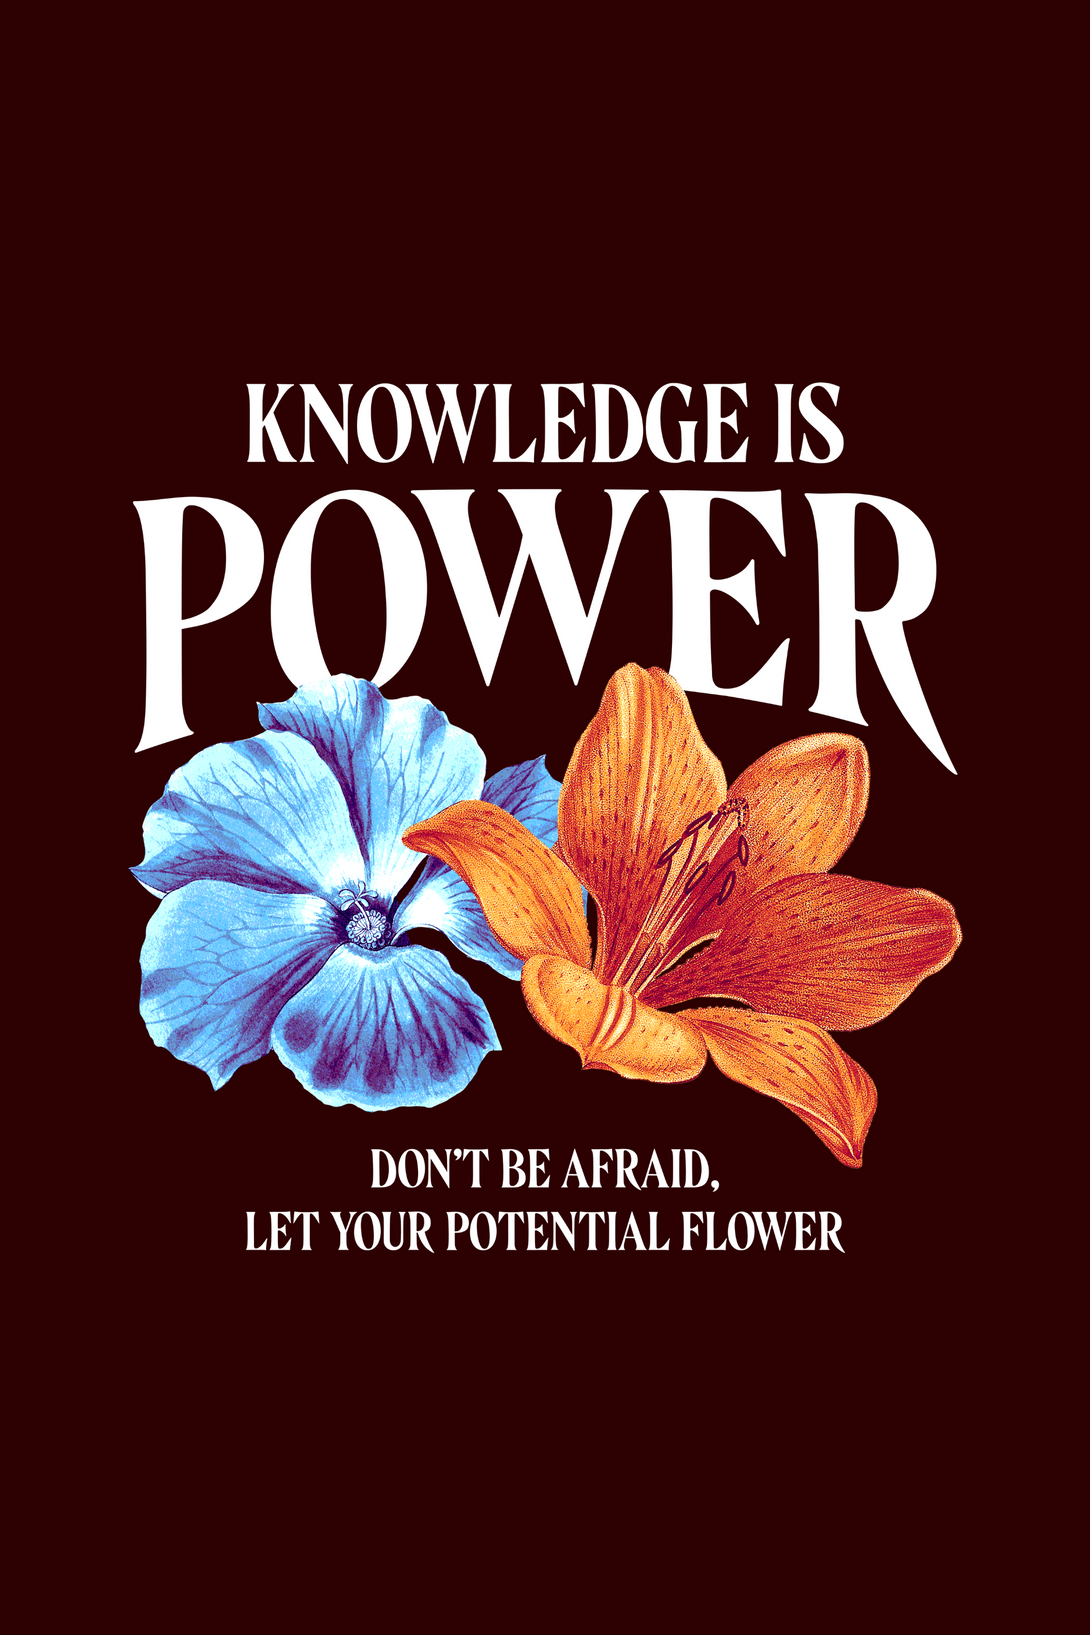 Knowledge Is Power Printed T-Shirt For Women - WowWaves - 1